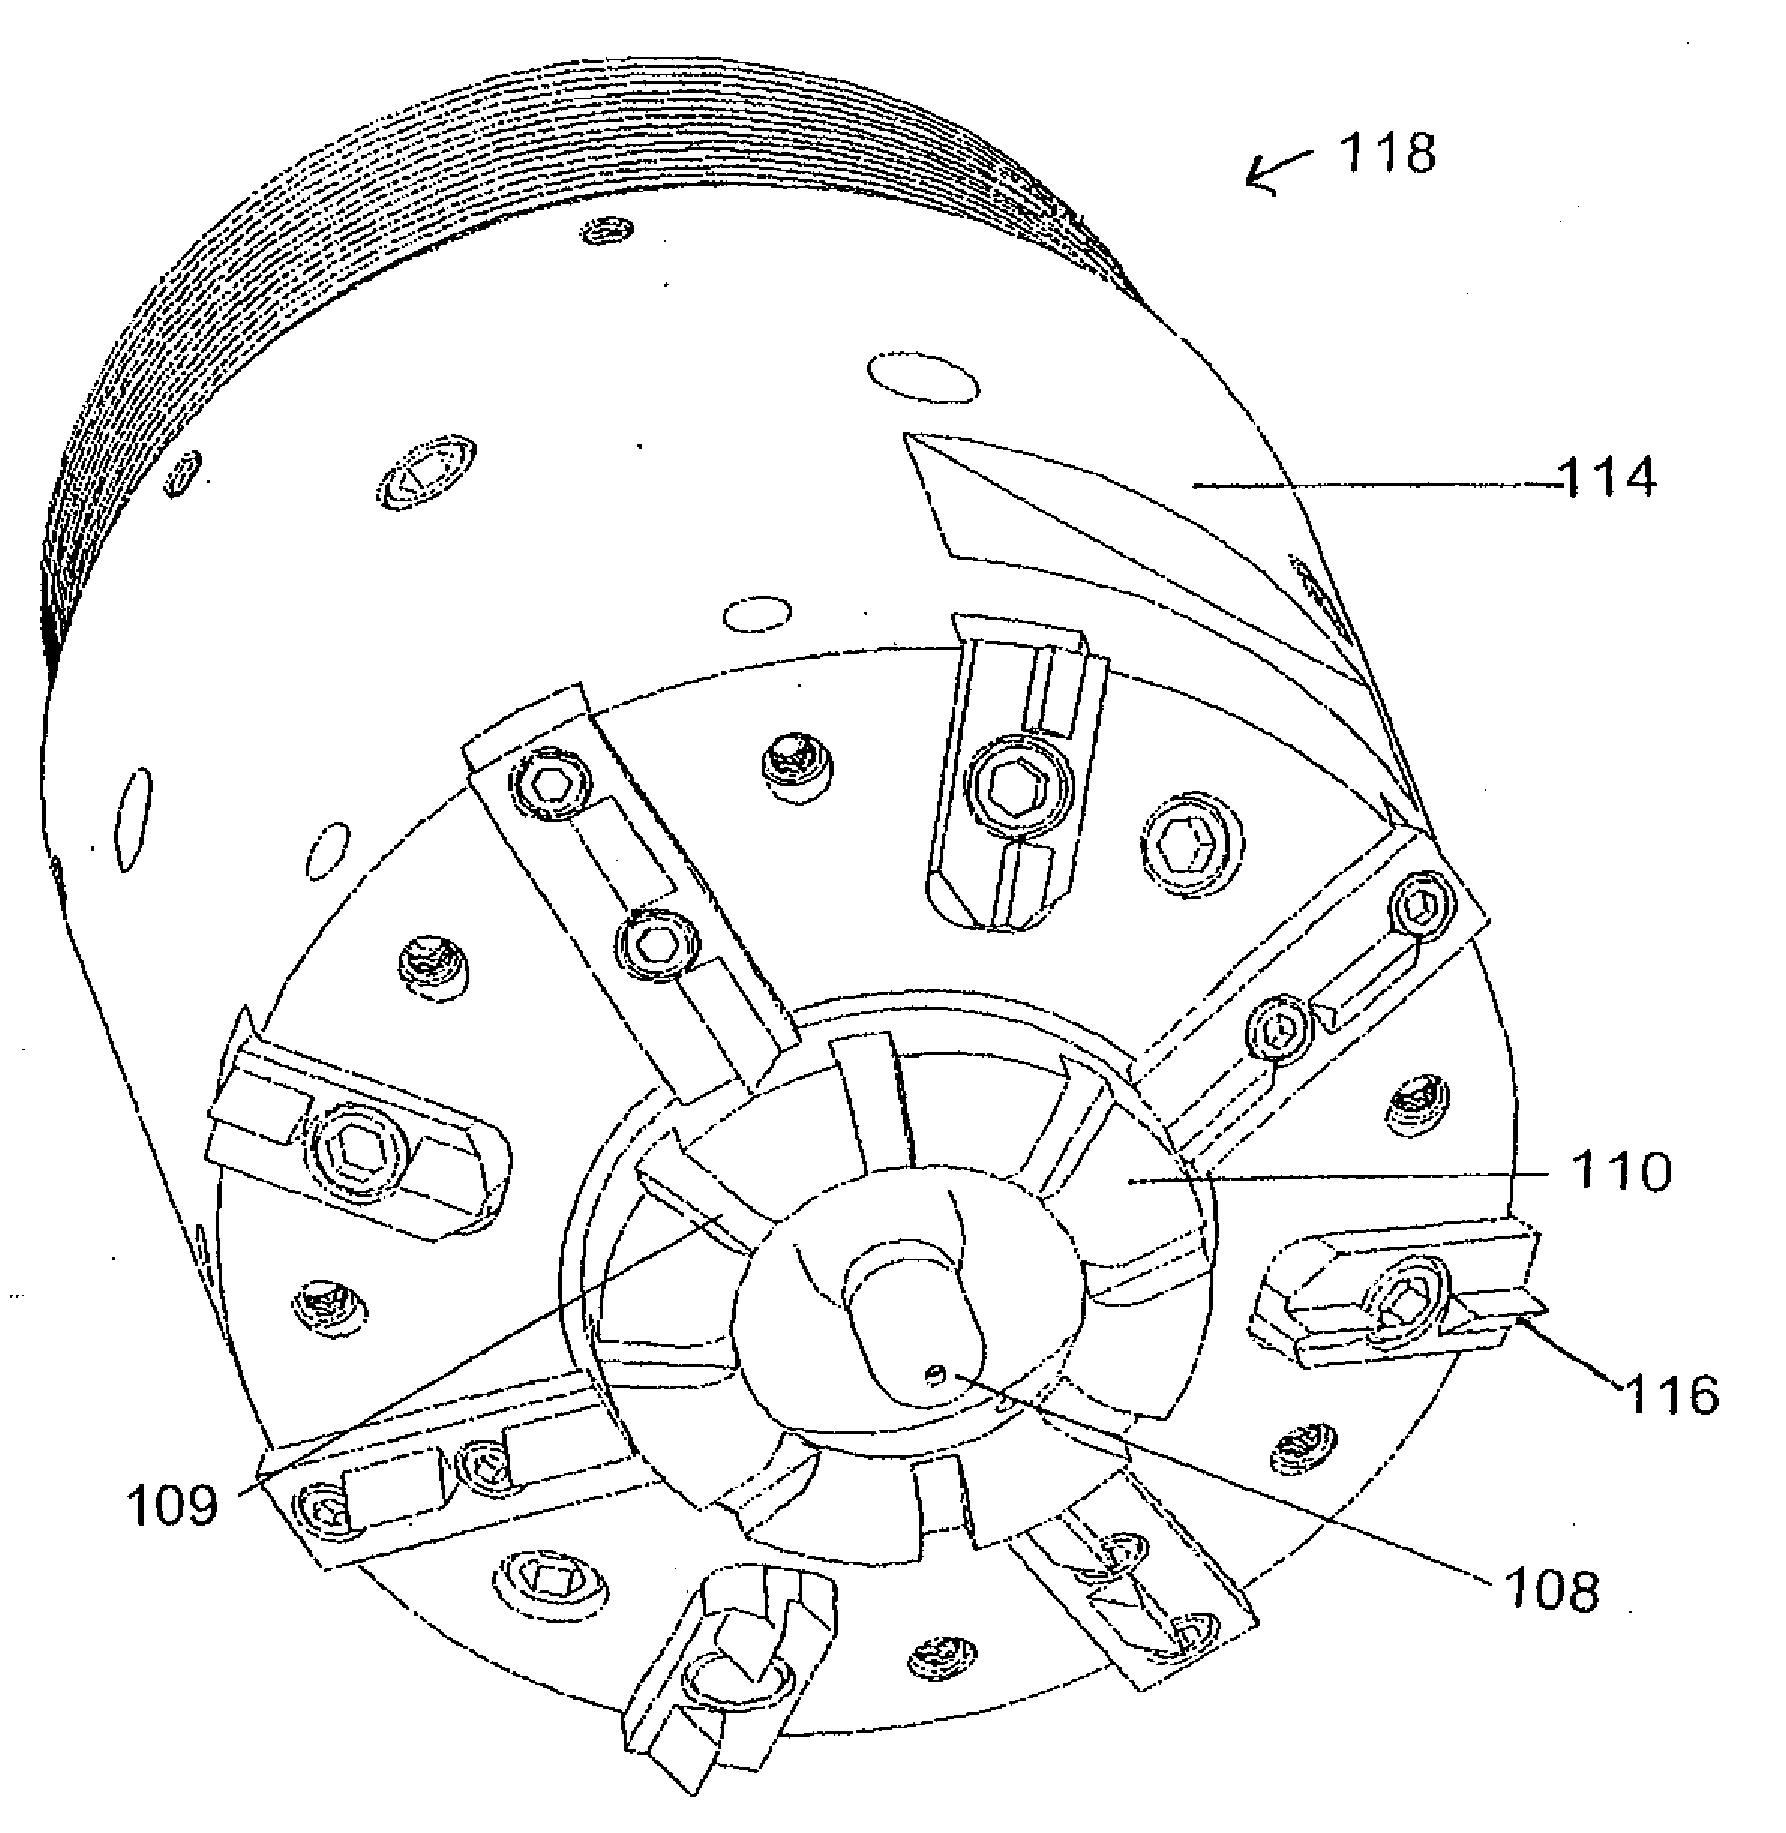 Pulsed Electric Rock Drilling Apparatus with Non-Rotating Bit and Directional Control